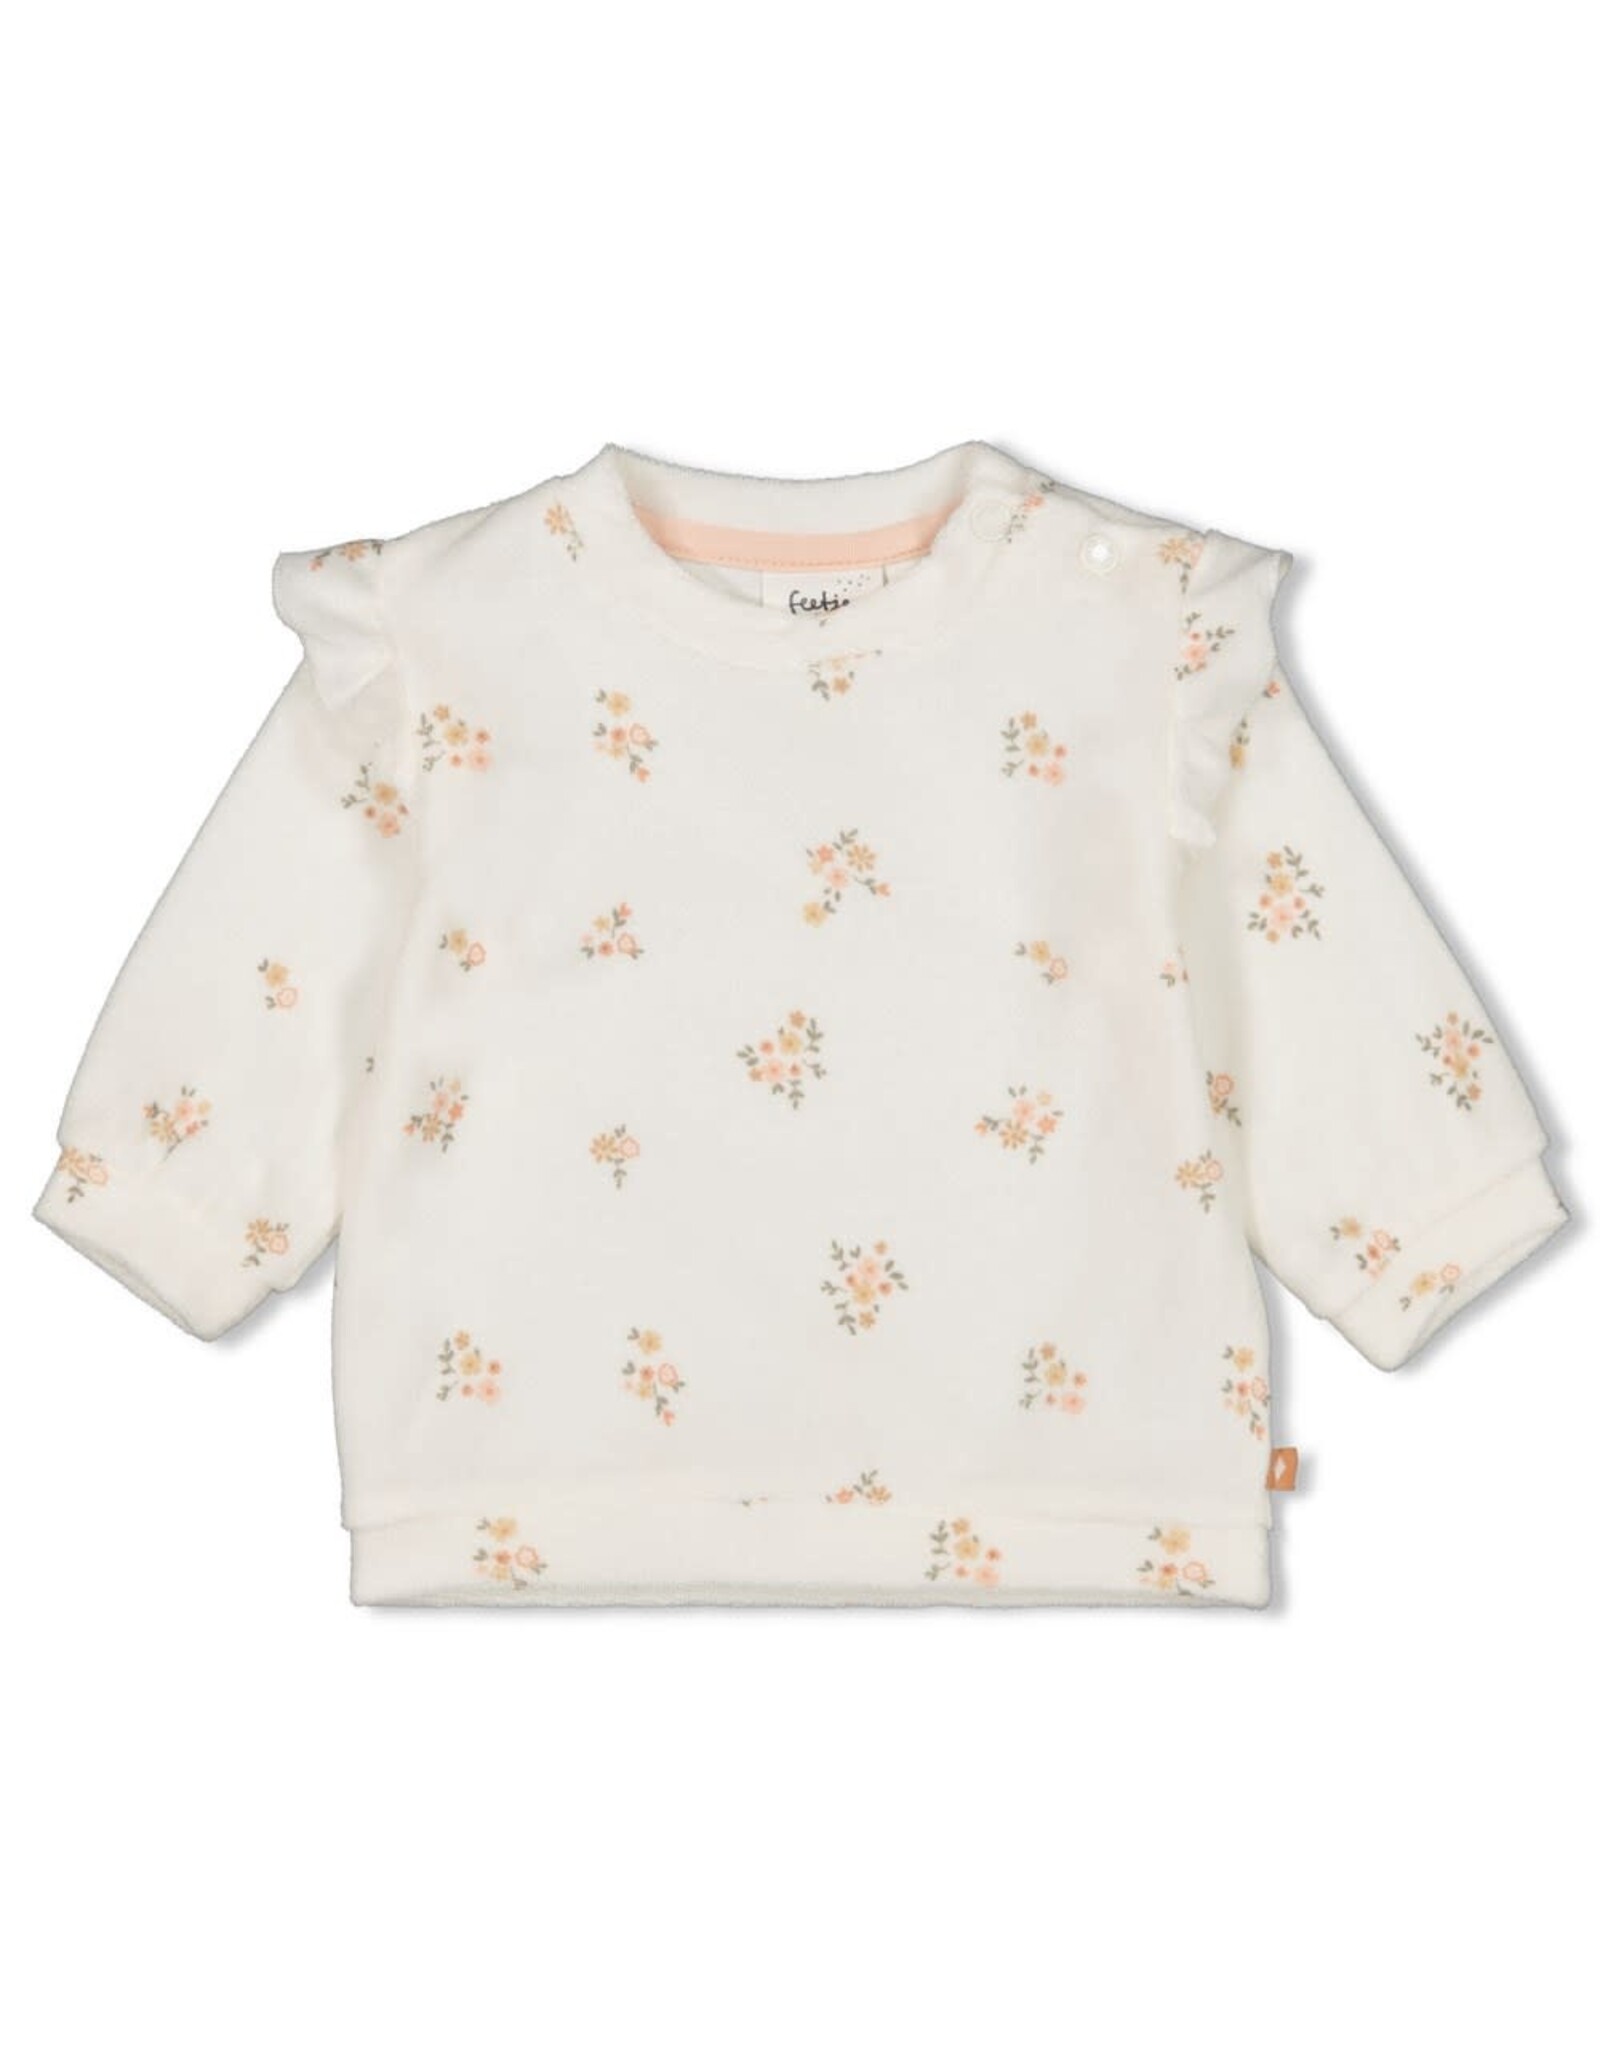 Feetje Sweater AOP - Bloom With Love Offwhite